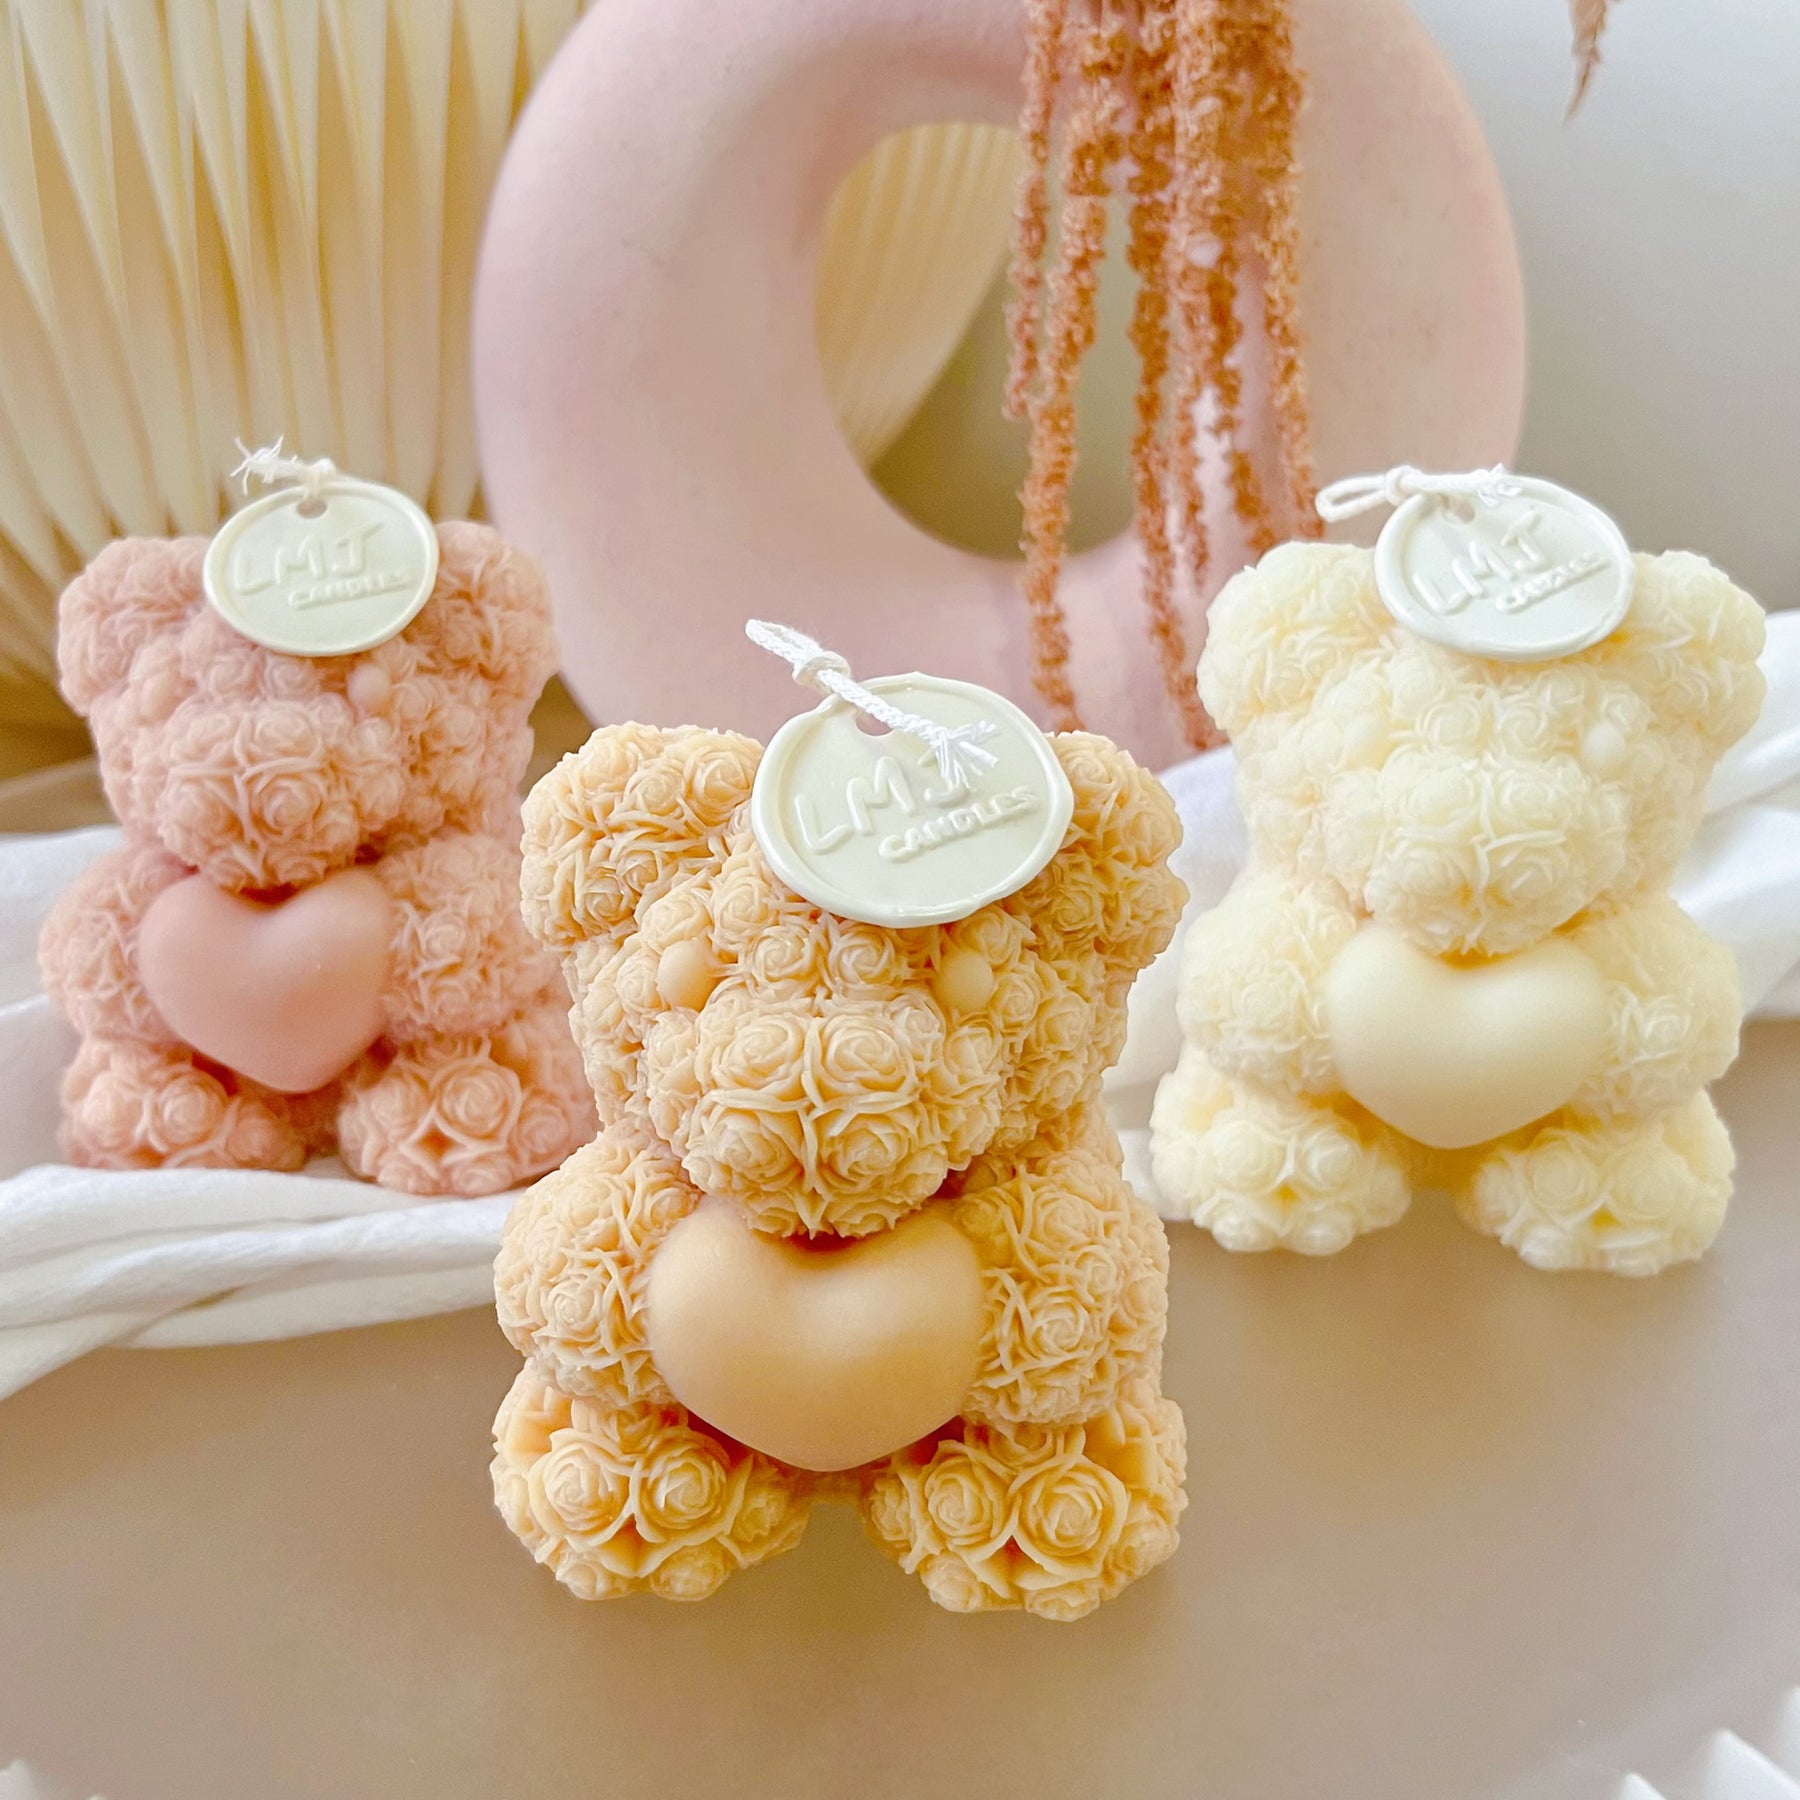 Rose Flower Teddy Bear Candle - Animal Candle Australia | LMJ Candles